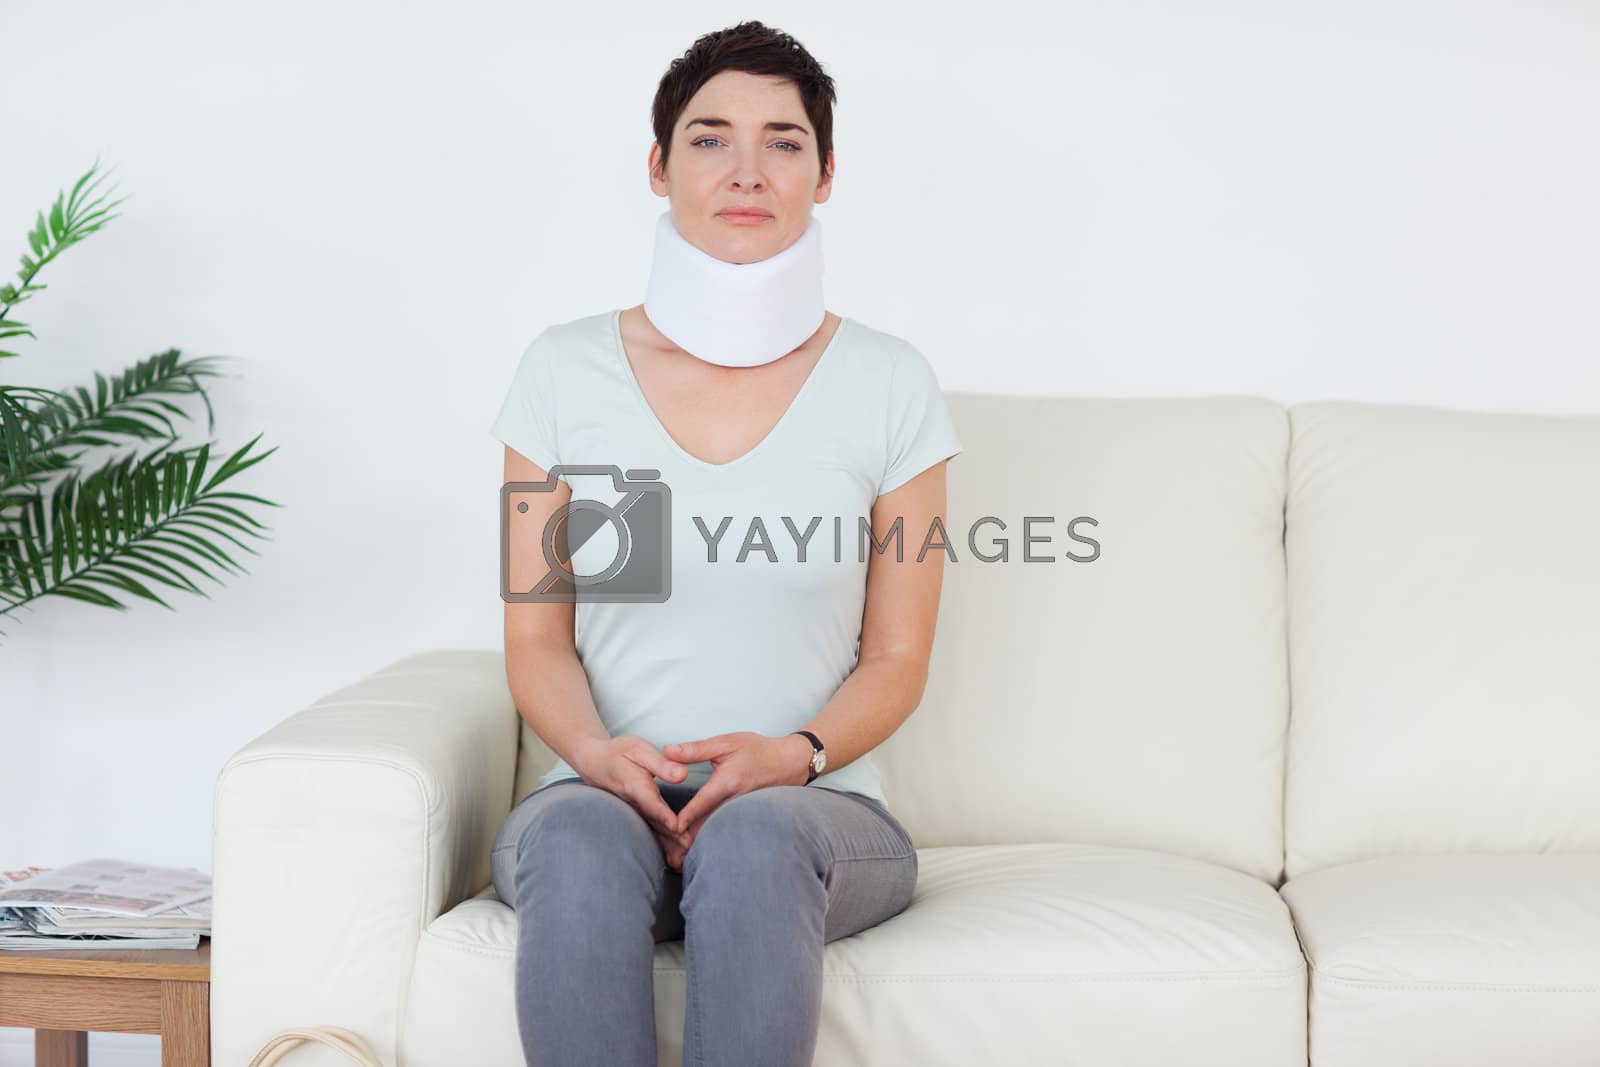 Royalty free image of Sad Woman with a surgical collar by Wavebreakmedia